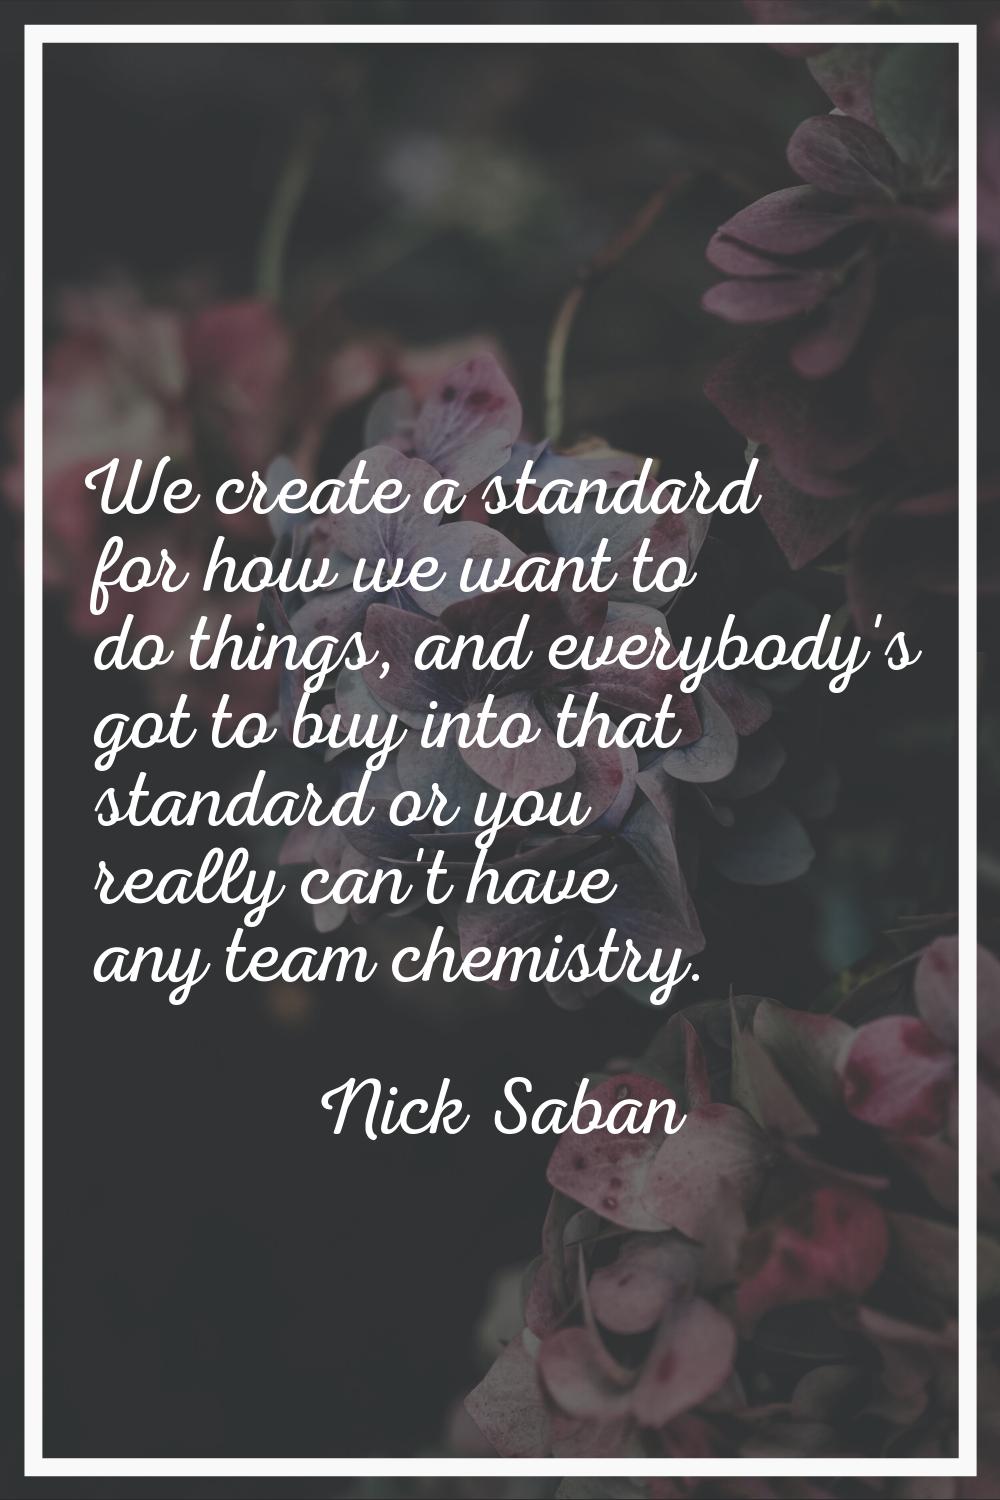 We create a standard for how we want to do things, and everybody's got to buy into that standard or